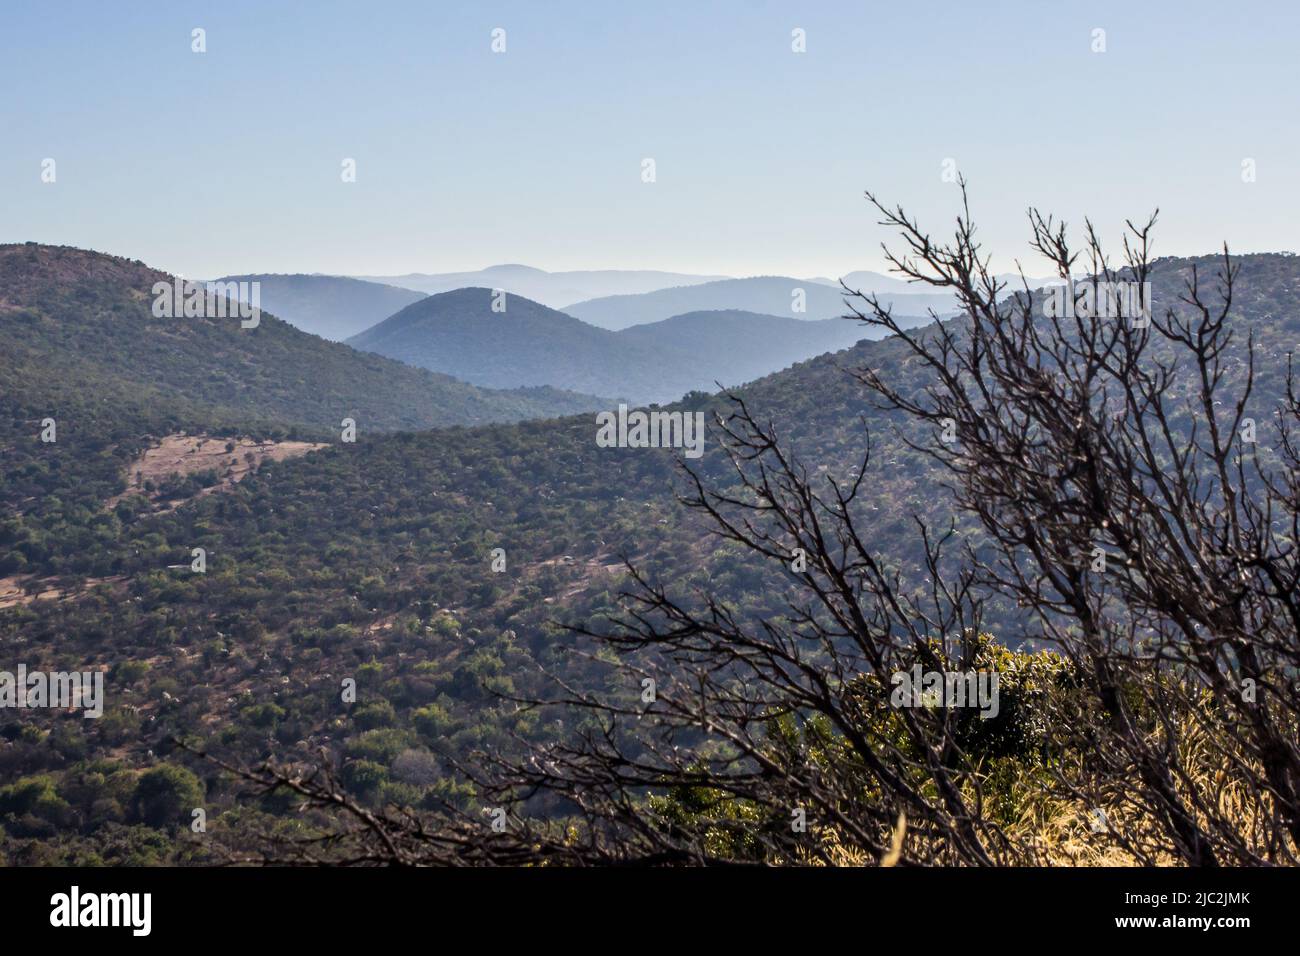 Distant view of the blue, concentric ridges, which form the outer rings of the Vredefort Dome in South Africa Stock Photo